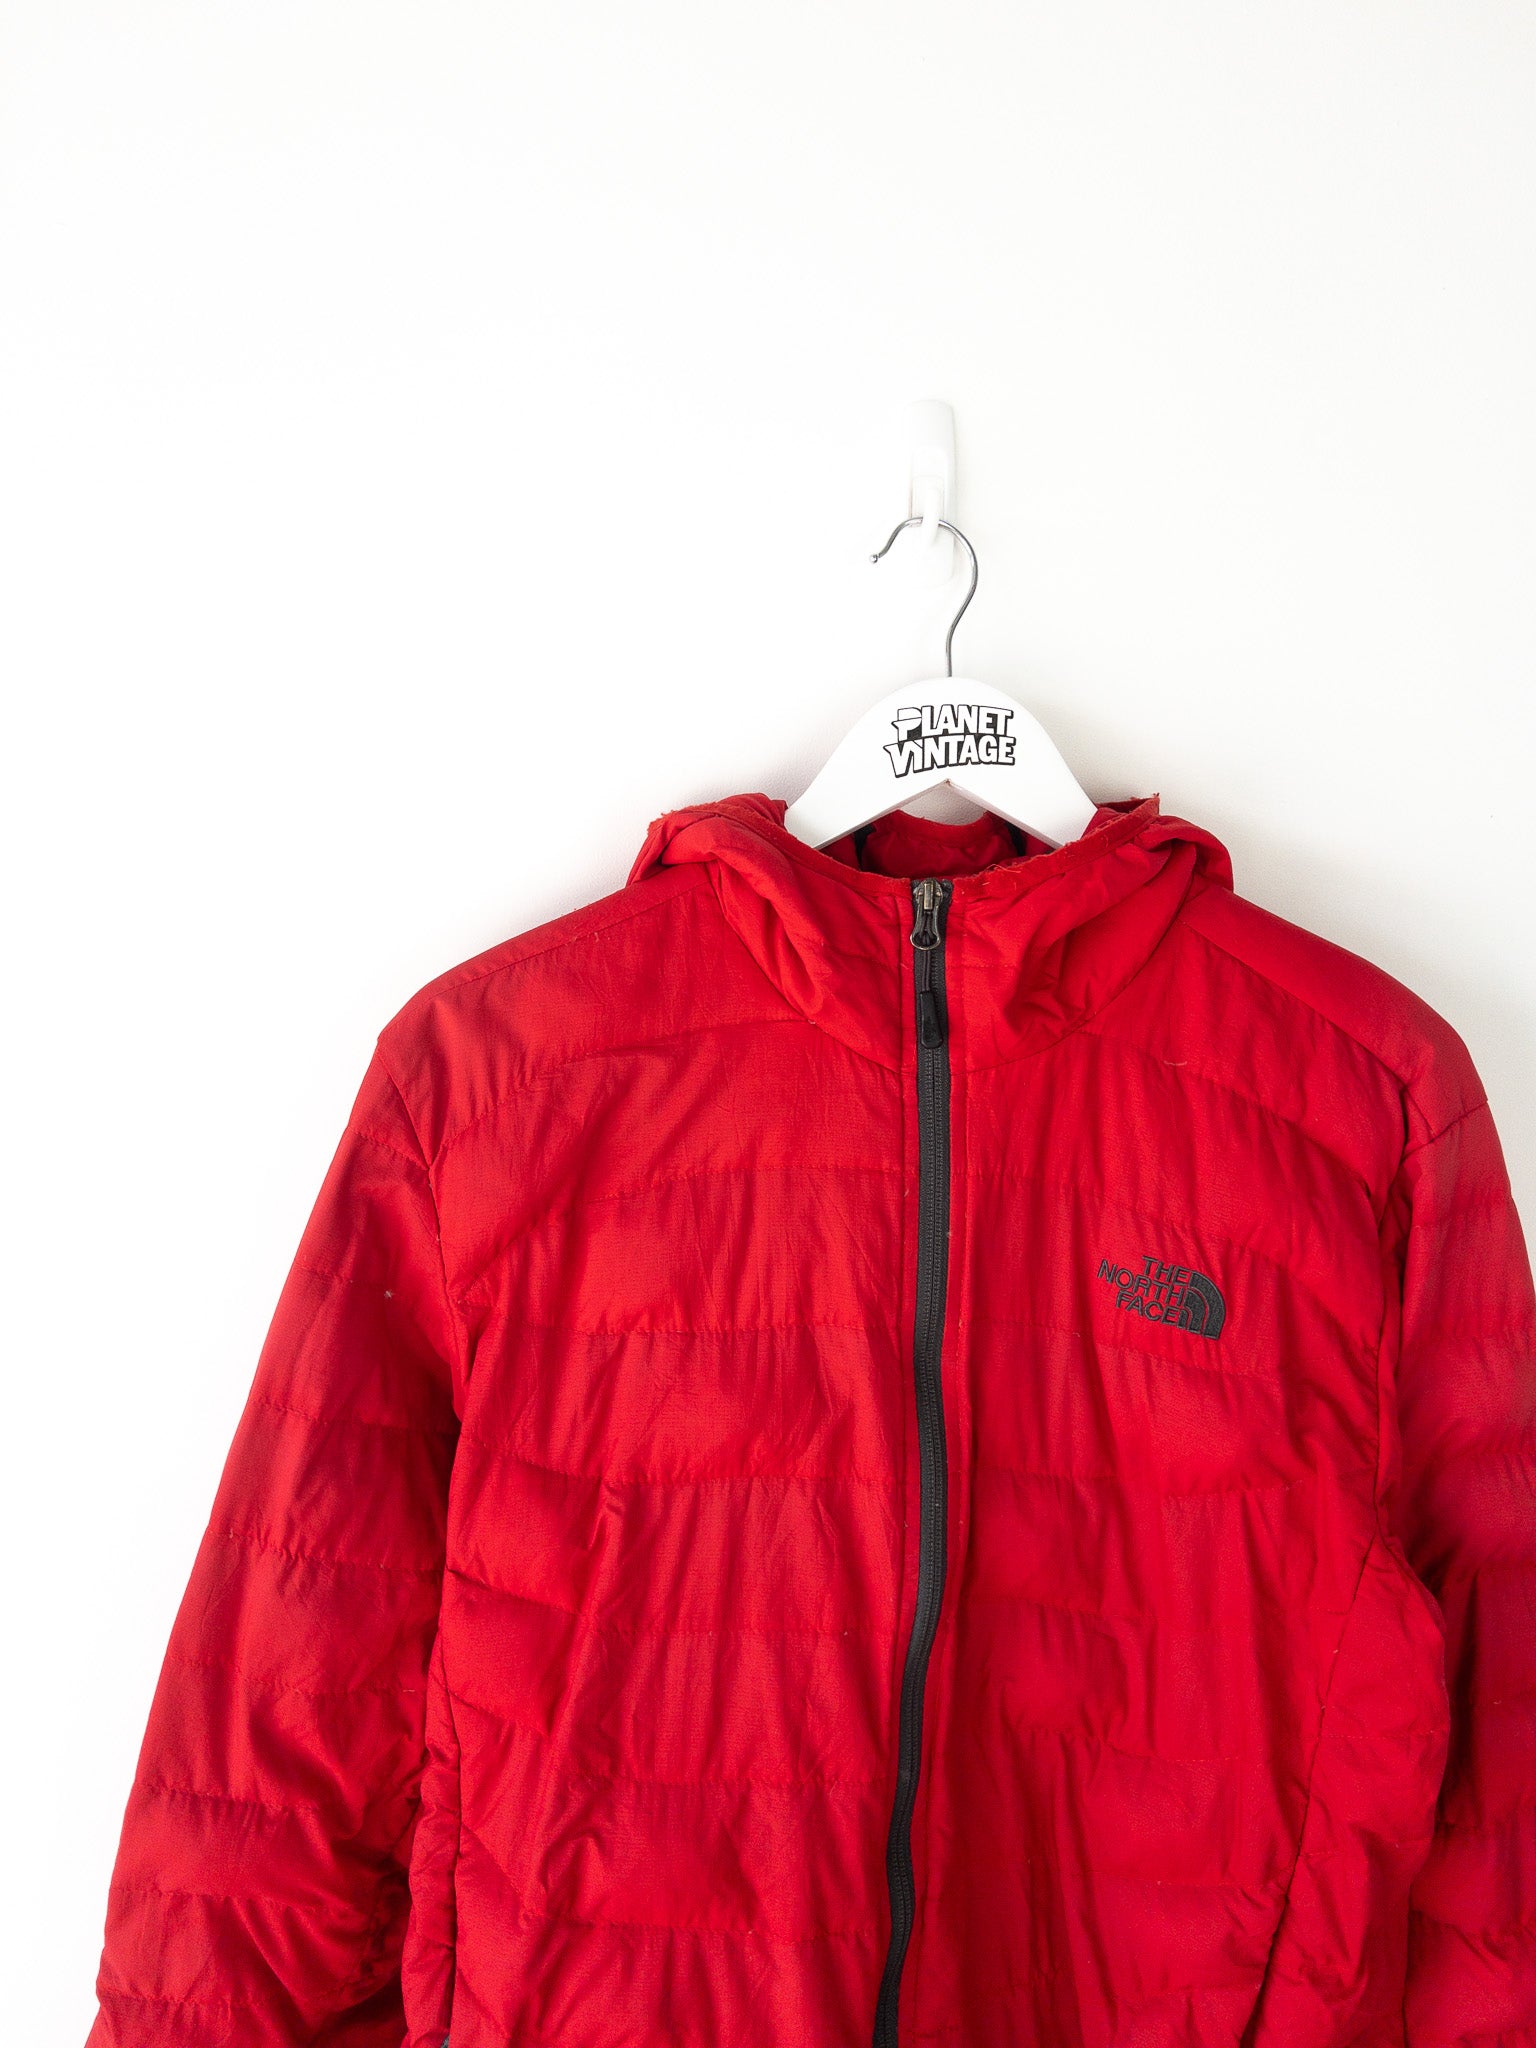 Vintage The North Face Jacket (M)